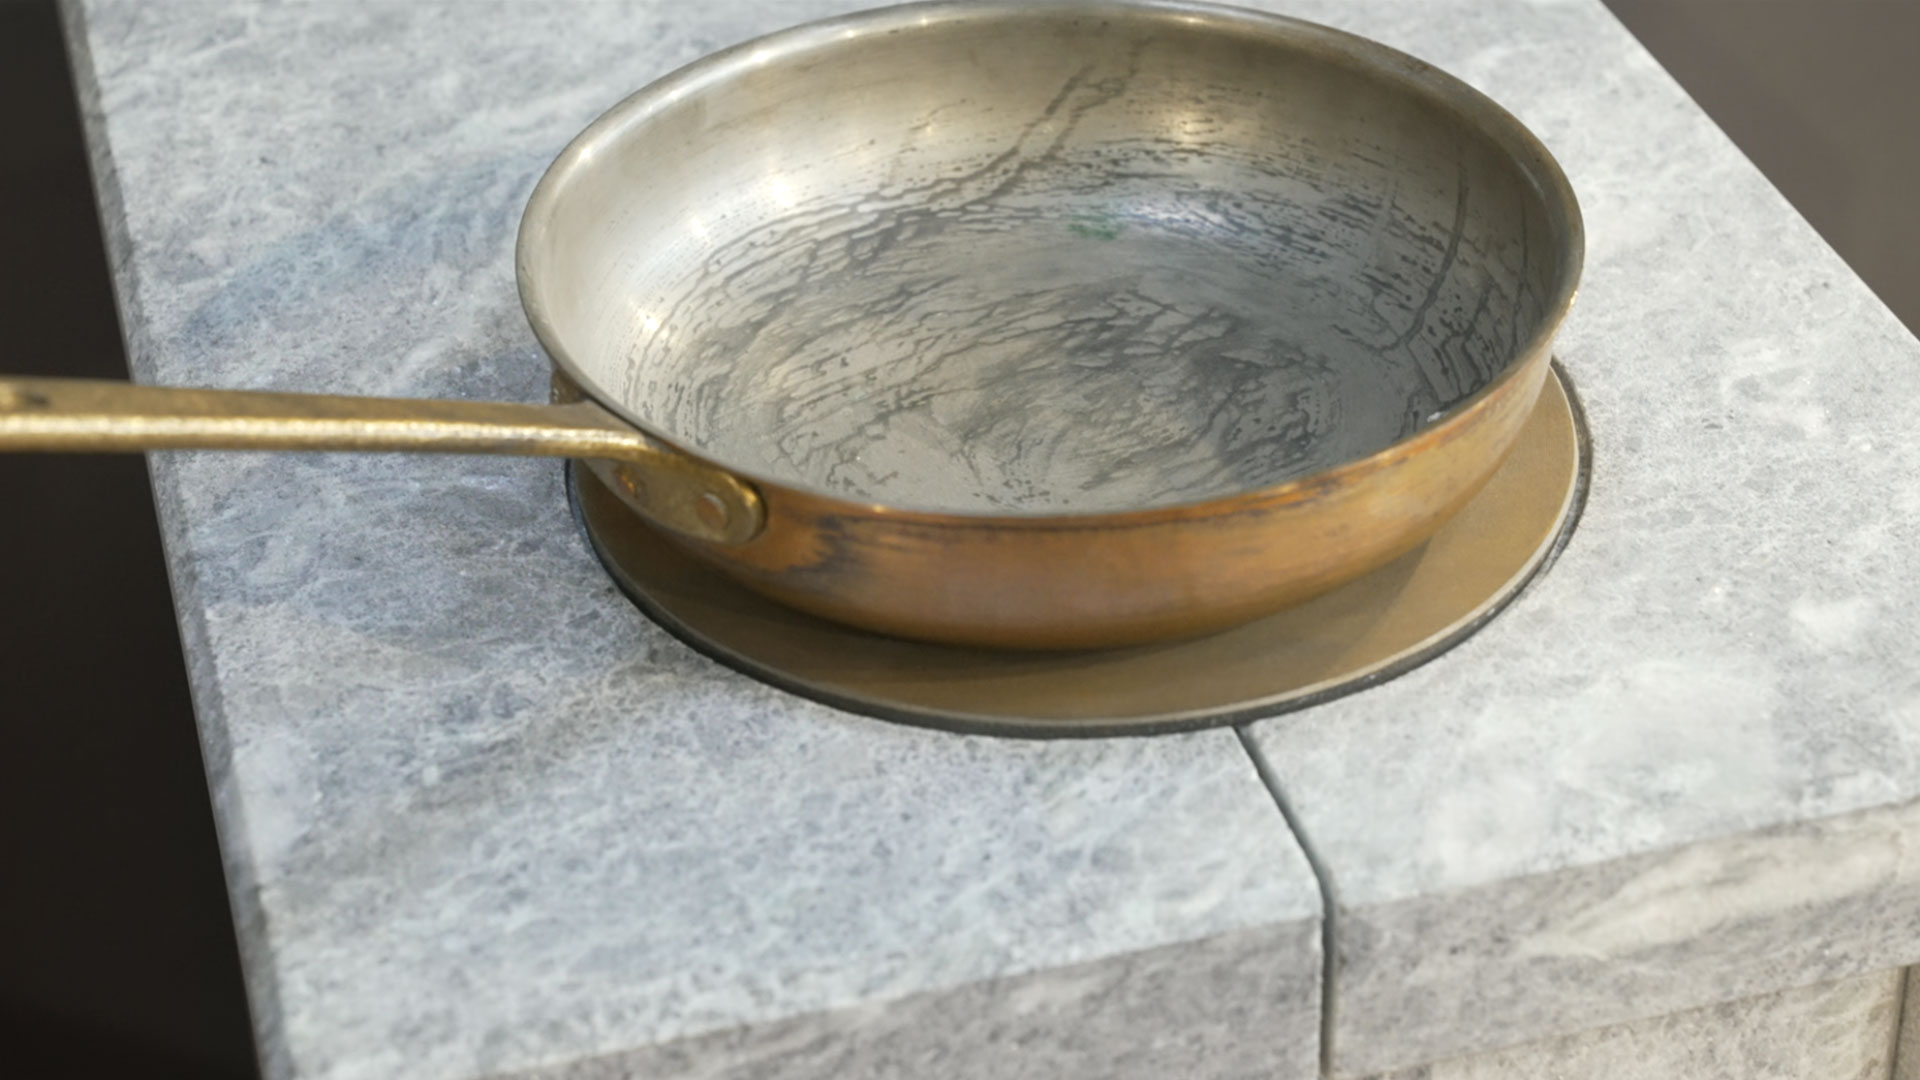 Cooking with a soapstone stove